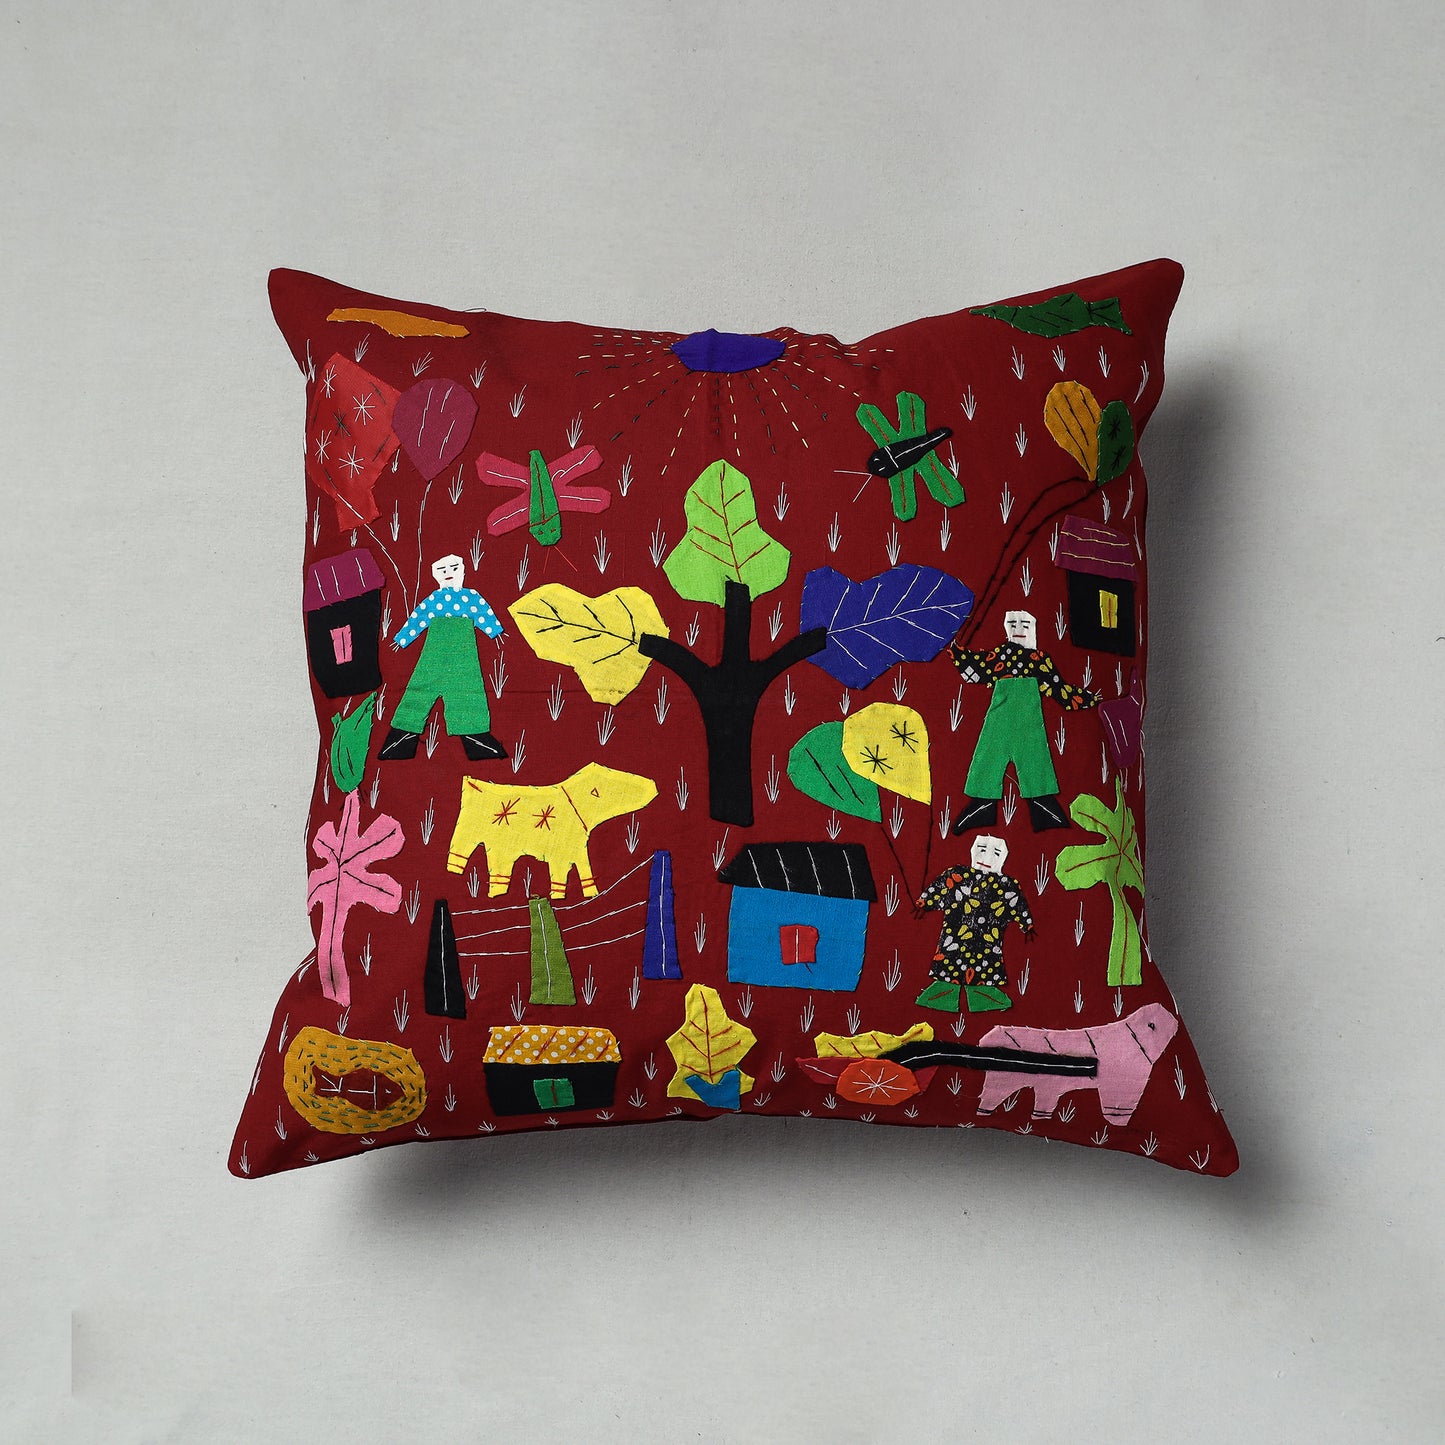 Red - Pipli Applique Work Cotton Cushion Cover (16 x 16 in)